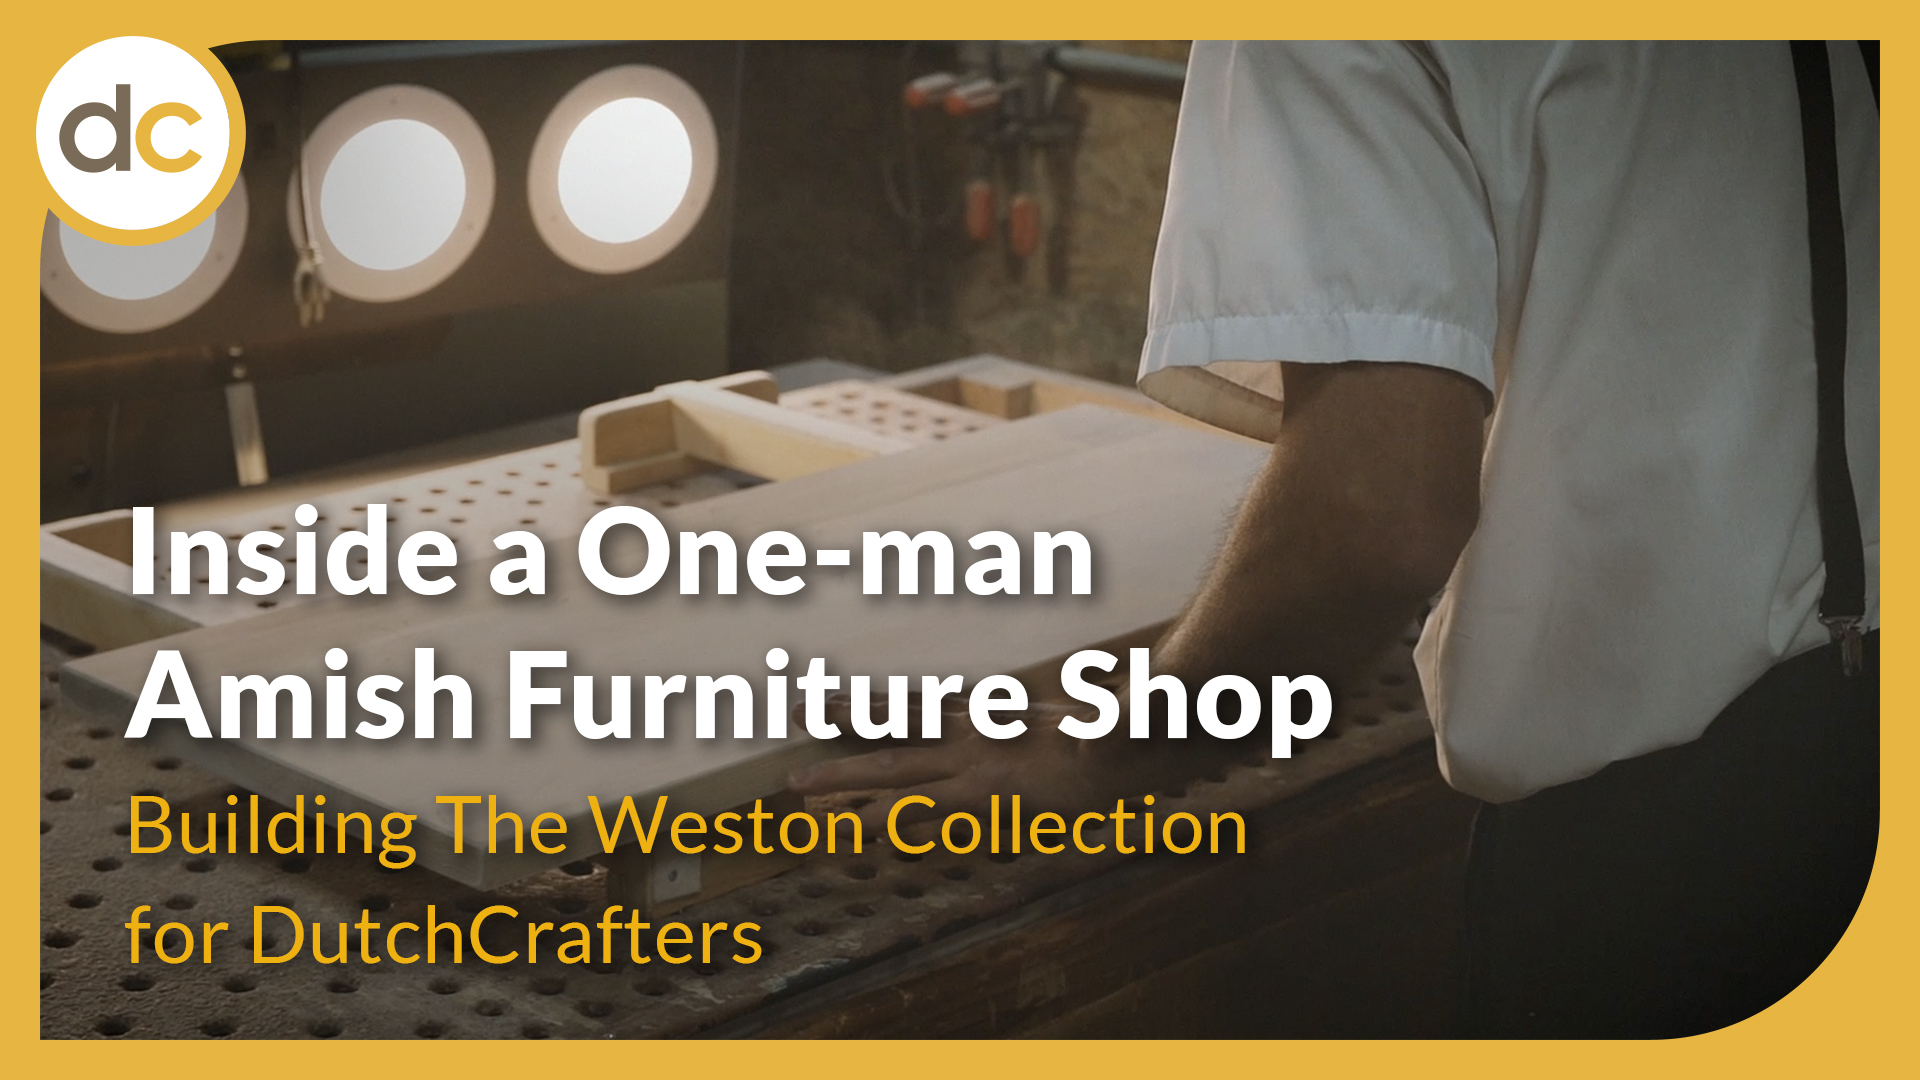 Text says, "Inside a One-man Amish Furniture Shop Building The Weston Collection for DutchCrafters"